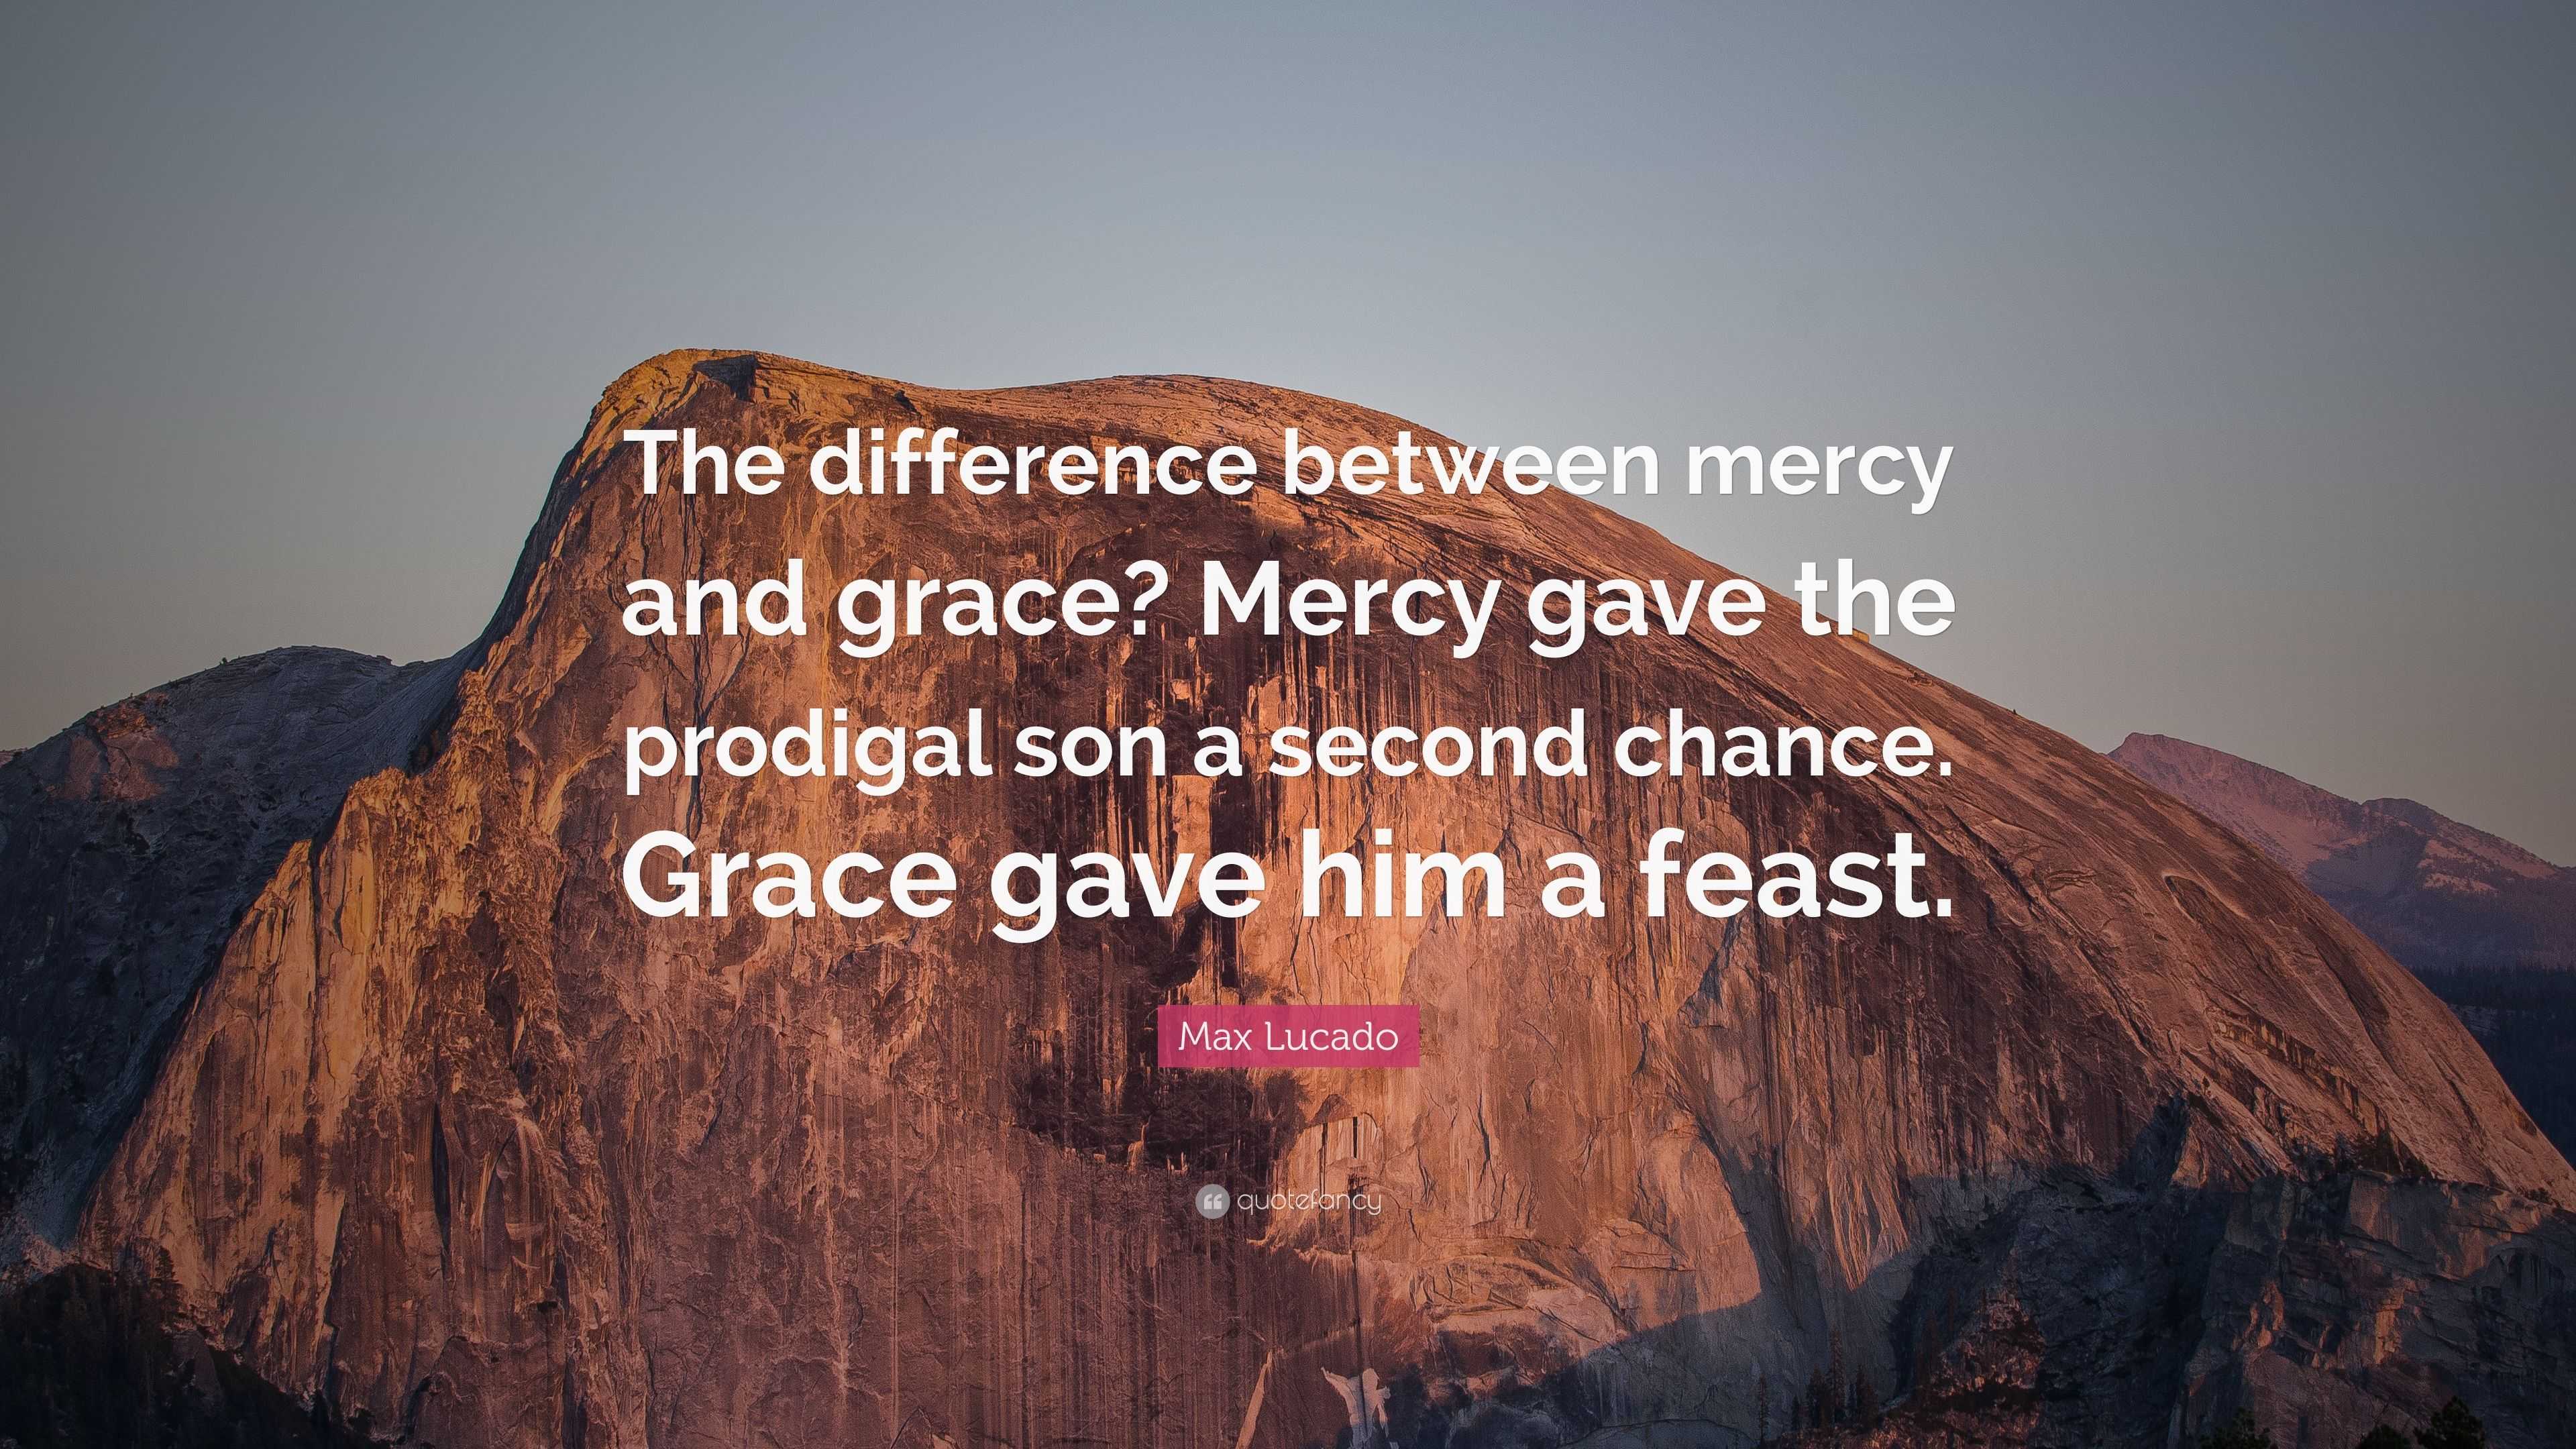 4689976 Max Lucado Quote The difference between mercy and grace Mercy gave